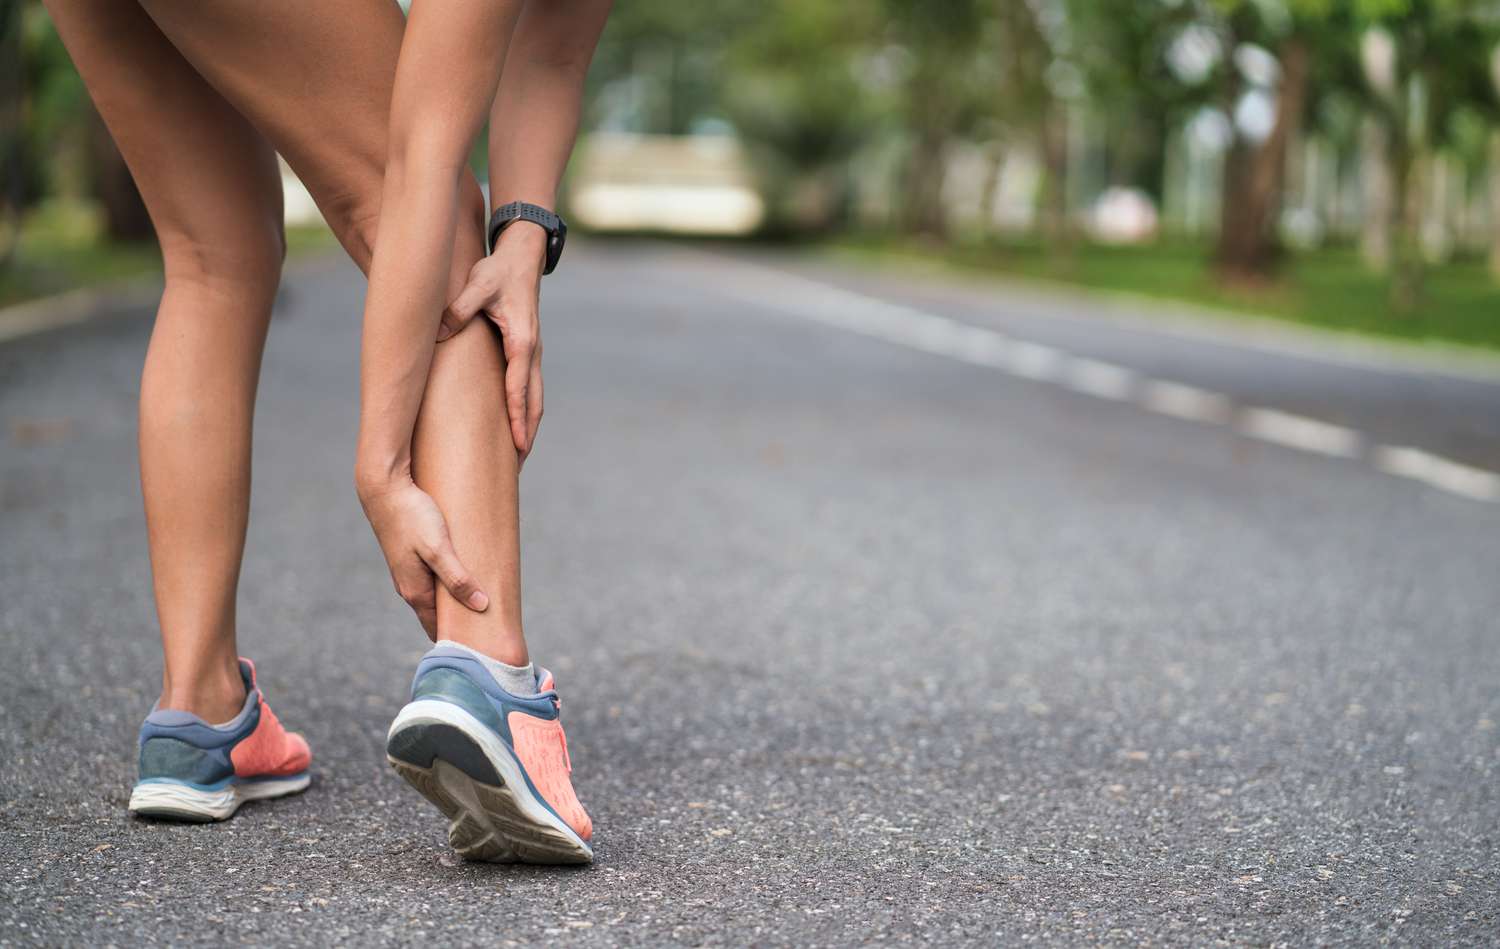 Achilles injury on running outdoors. Women holding Achilles tendon by hands close-up and suffering with pain. Ankle twist sprain accident in sport exercise running jogging.